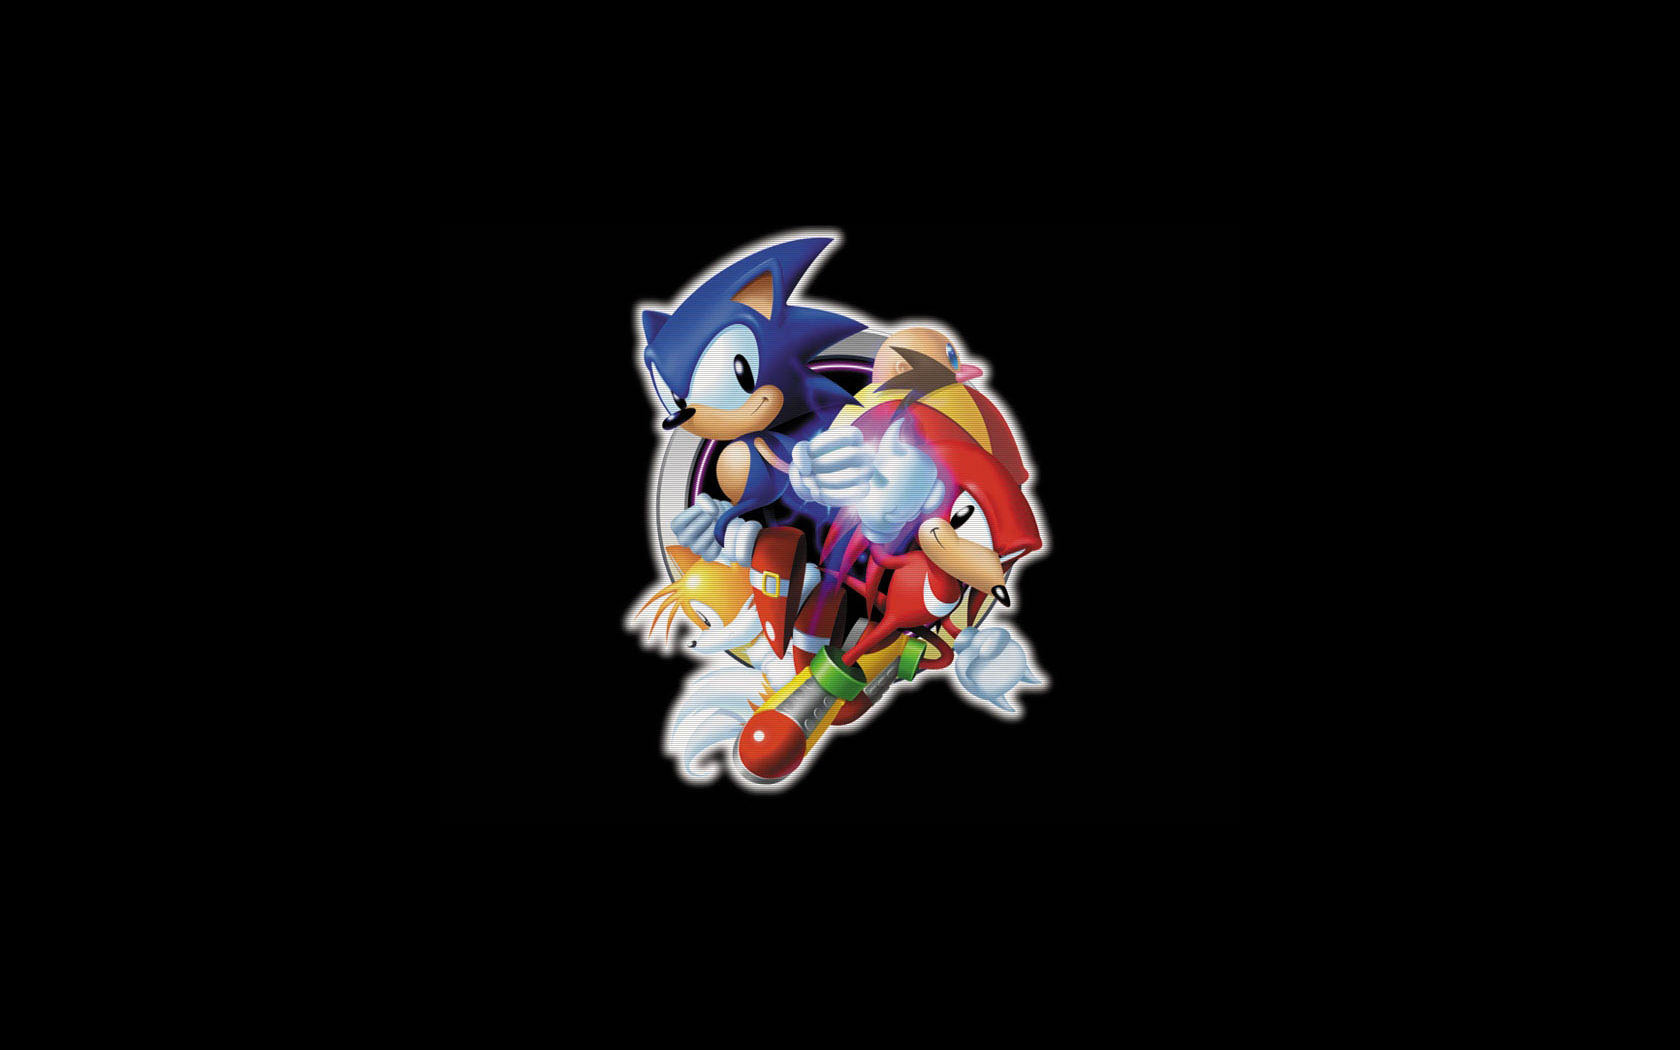 sonic & knuckles, video game, doctor eggman, knuckles the echidna, miles 'tails' prower, sonic the hedgehog, sonic